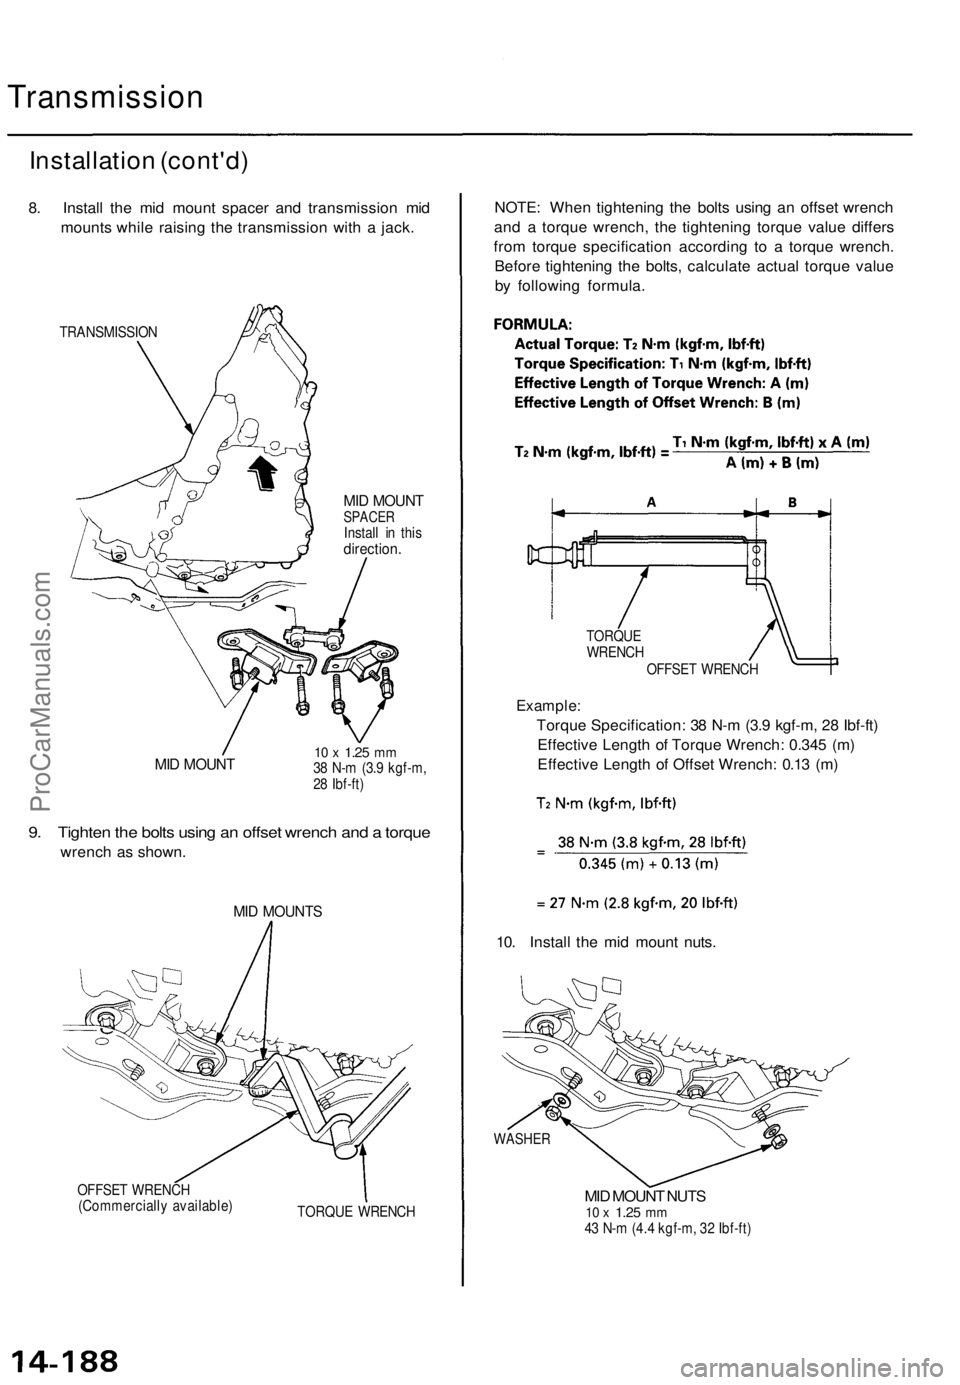 ACURA TL 1995  Service Repair Manual 
Transmission

Installation (cont'd)

8. Install the mid mount spacer and transmission mid

mounts while raising the transmission with a jack.

TRANSMISSION

MID MOUNT

SPACER

Install in this

di